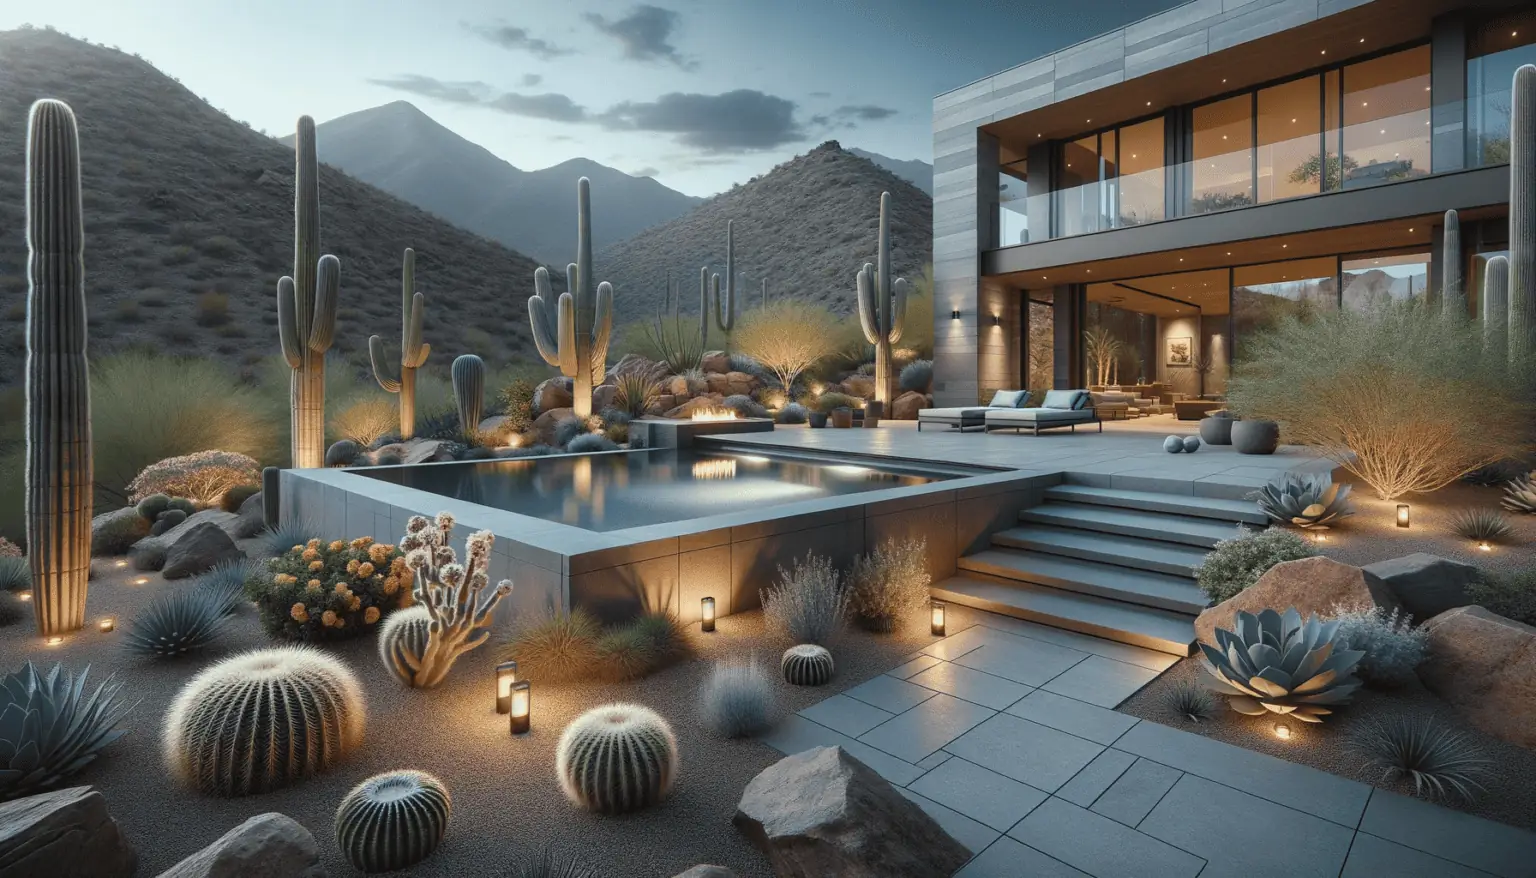 Natural Stone Pavers - modern mountainside home in AZ